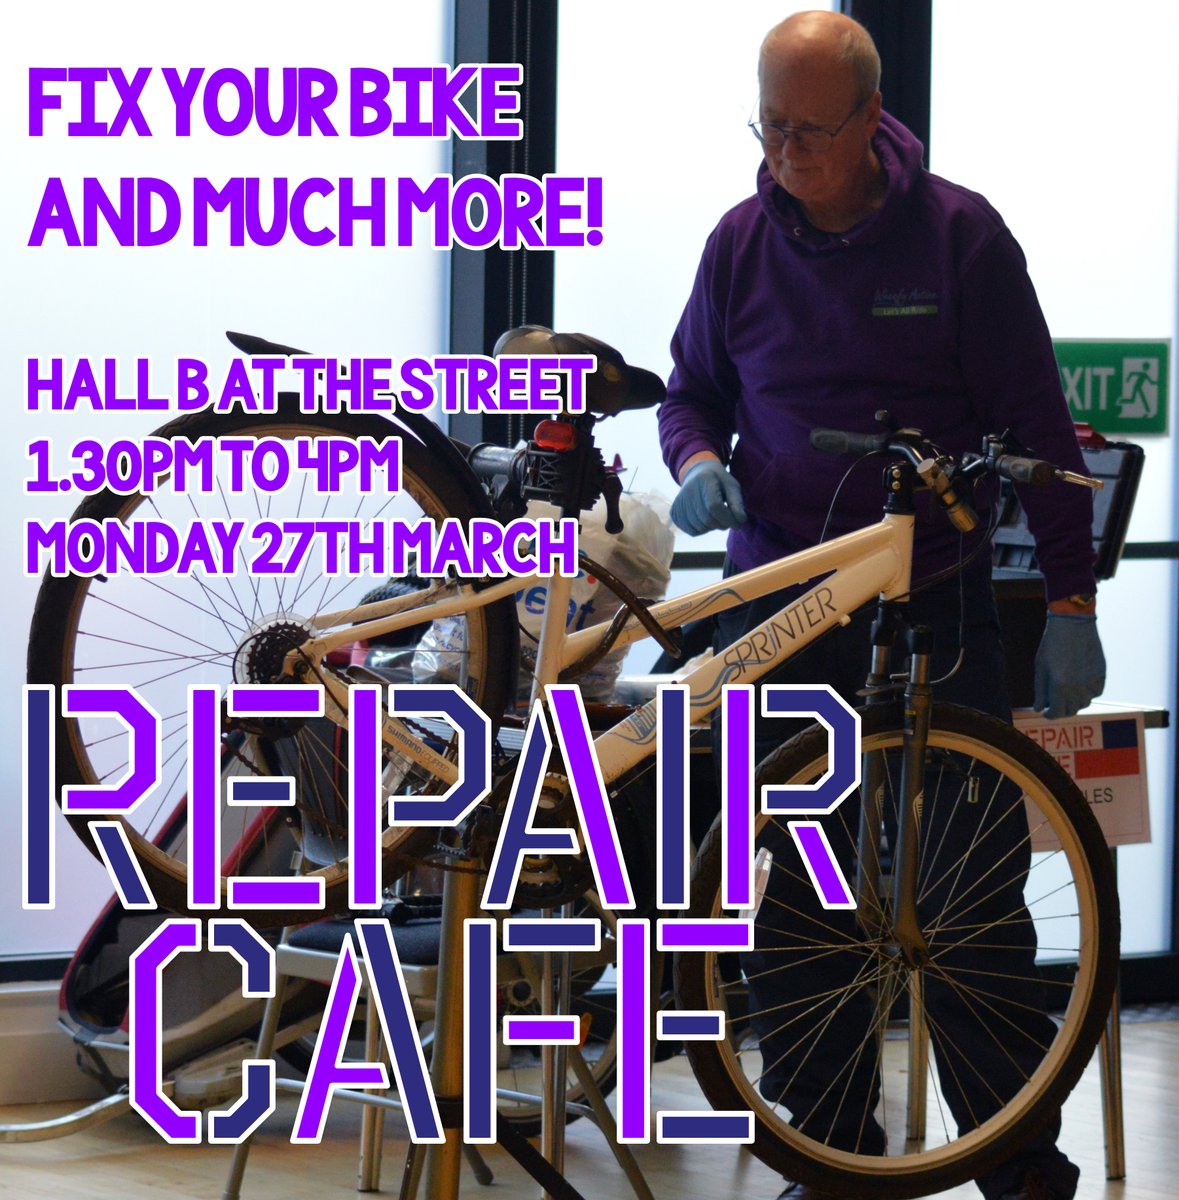 Got a bike that needs fixing? Our team of repairers at the Repair Cafe can help you out! Many other items can be fixed - just bring them along to Hall B at @TheStreet_UK on Monday 27th March from 1.30-4pm - it's FREE to get anything repaired! #Scarborough #repairing 💚